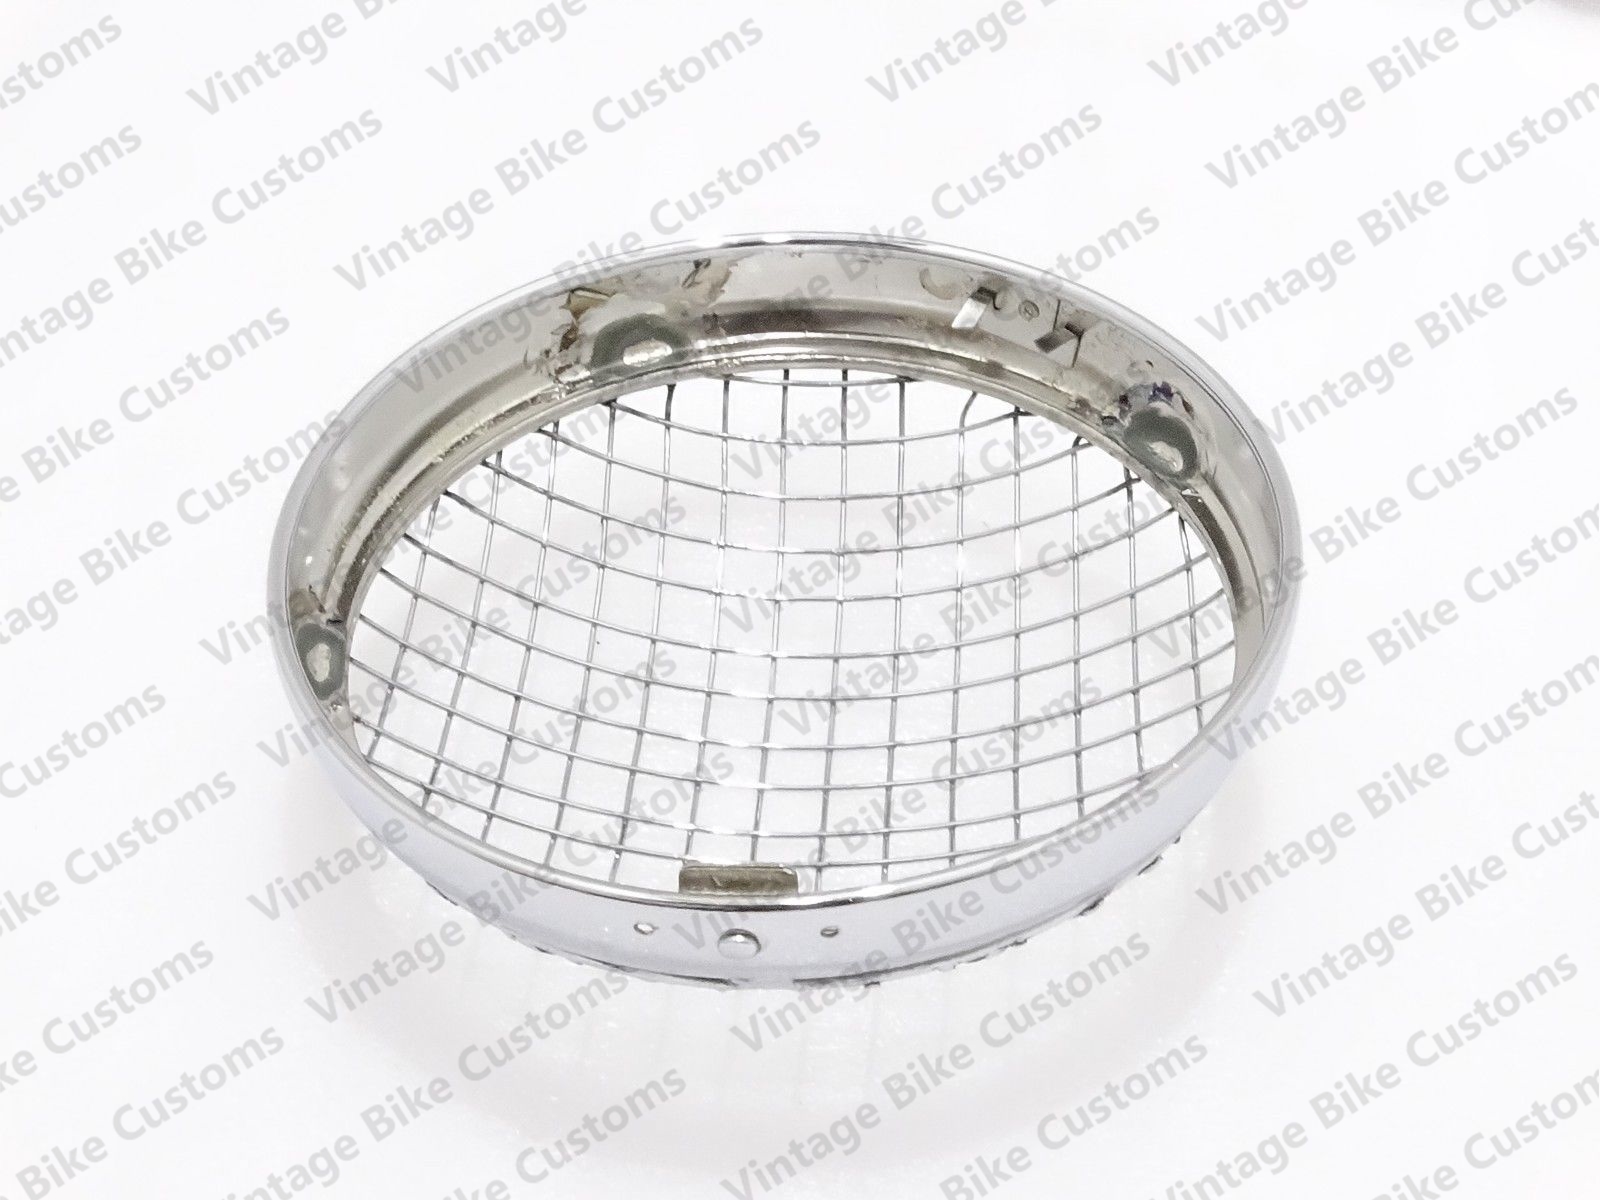 Details about   5x UNIVERSAL 7" CHROME PLATED HEADLIGHT GRILL WITH CLAMP ROYAL ENFIELD NEW BRAND 